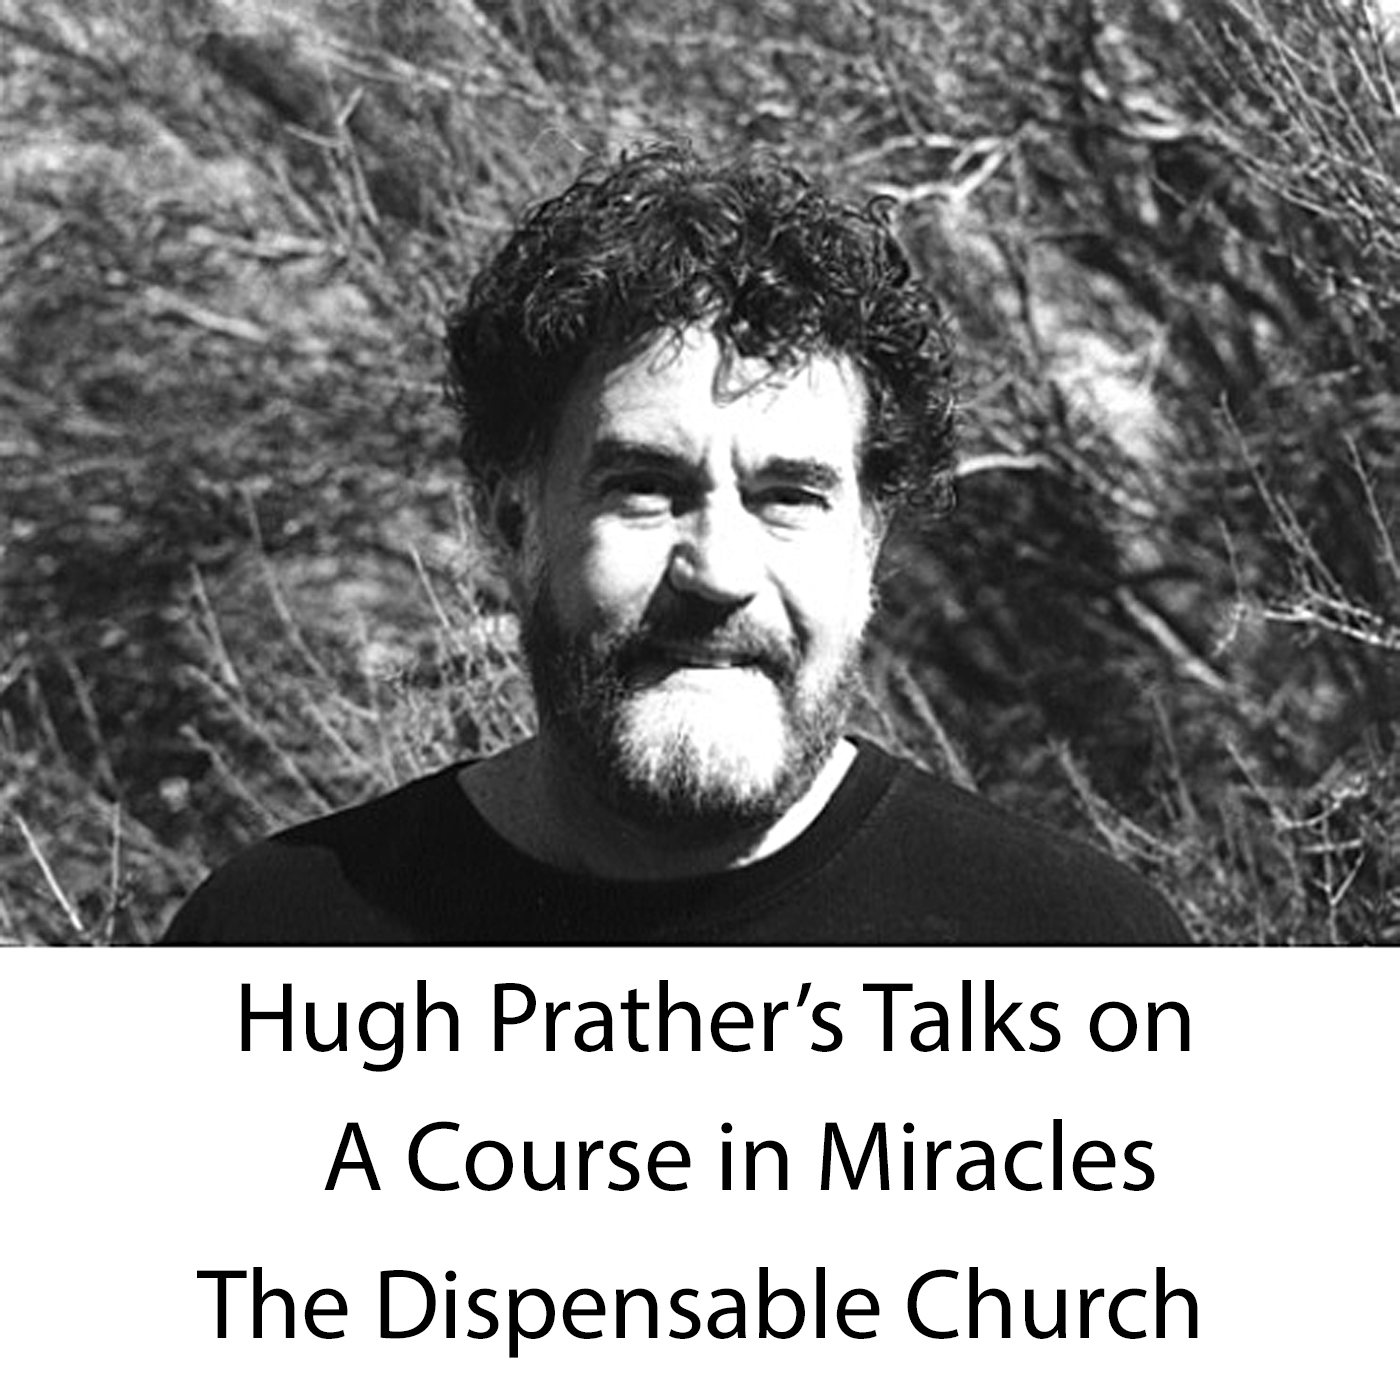 Hugh Prather's Talks on A Course in Miracles